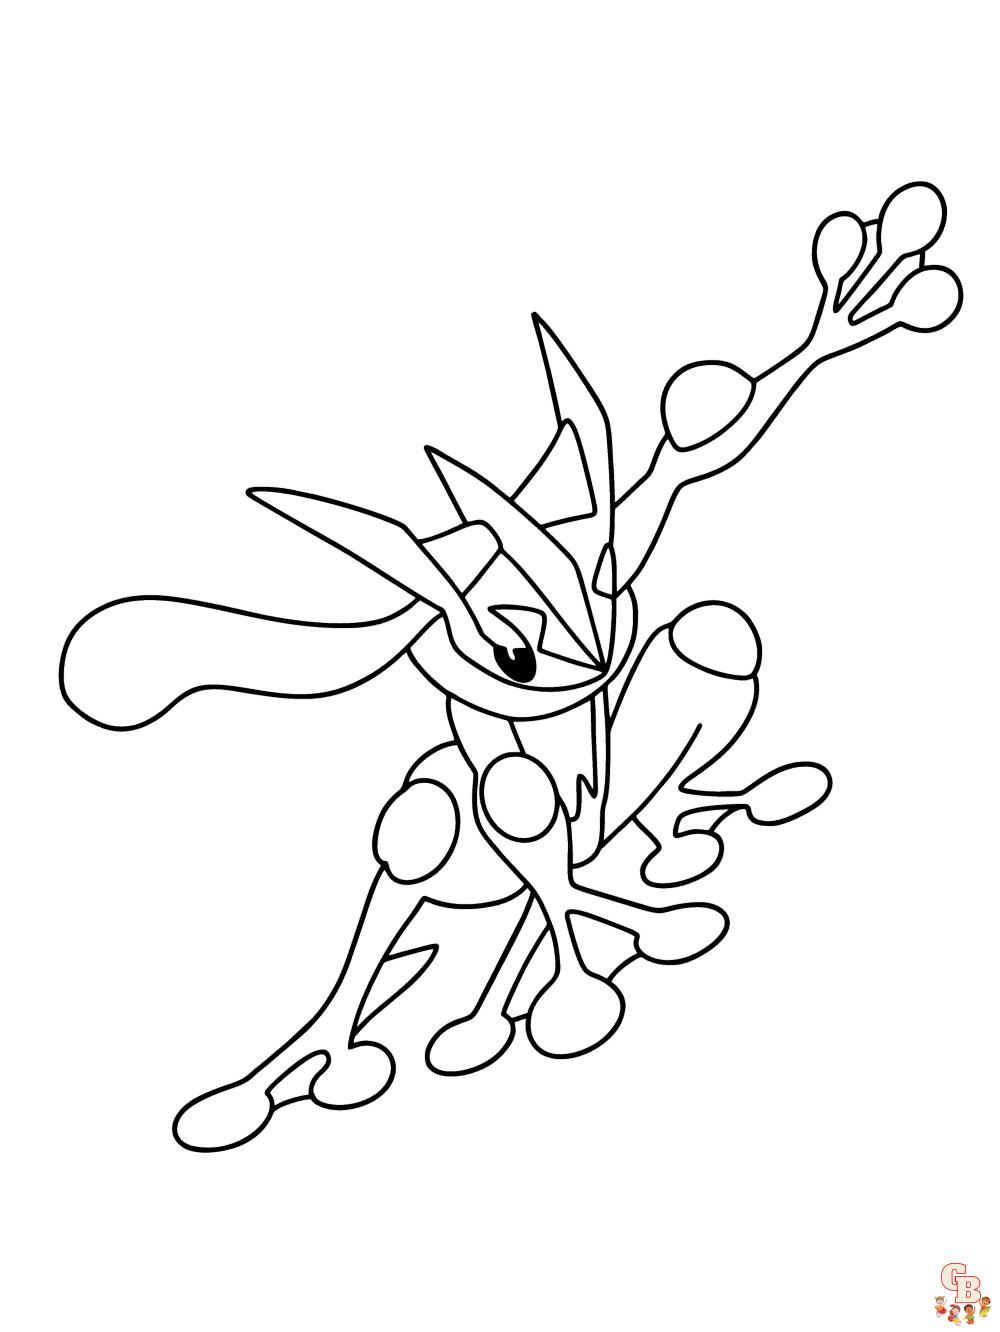 Greninja Coloring Pages Free, Printable, and Easy - GBcoloring